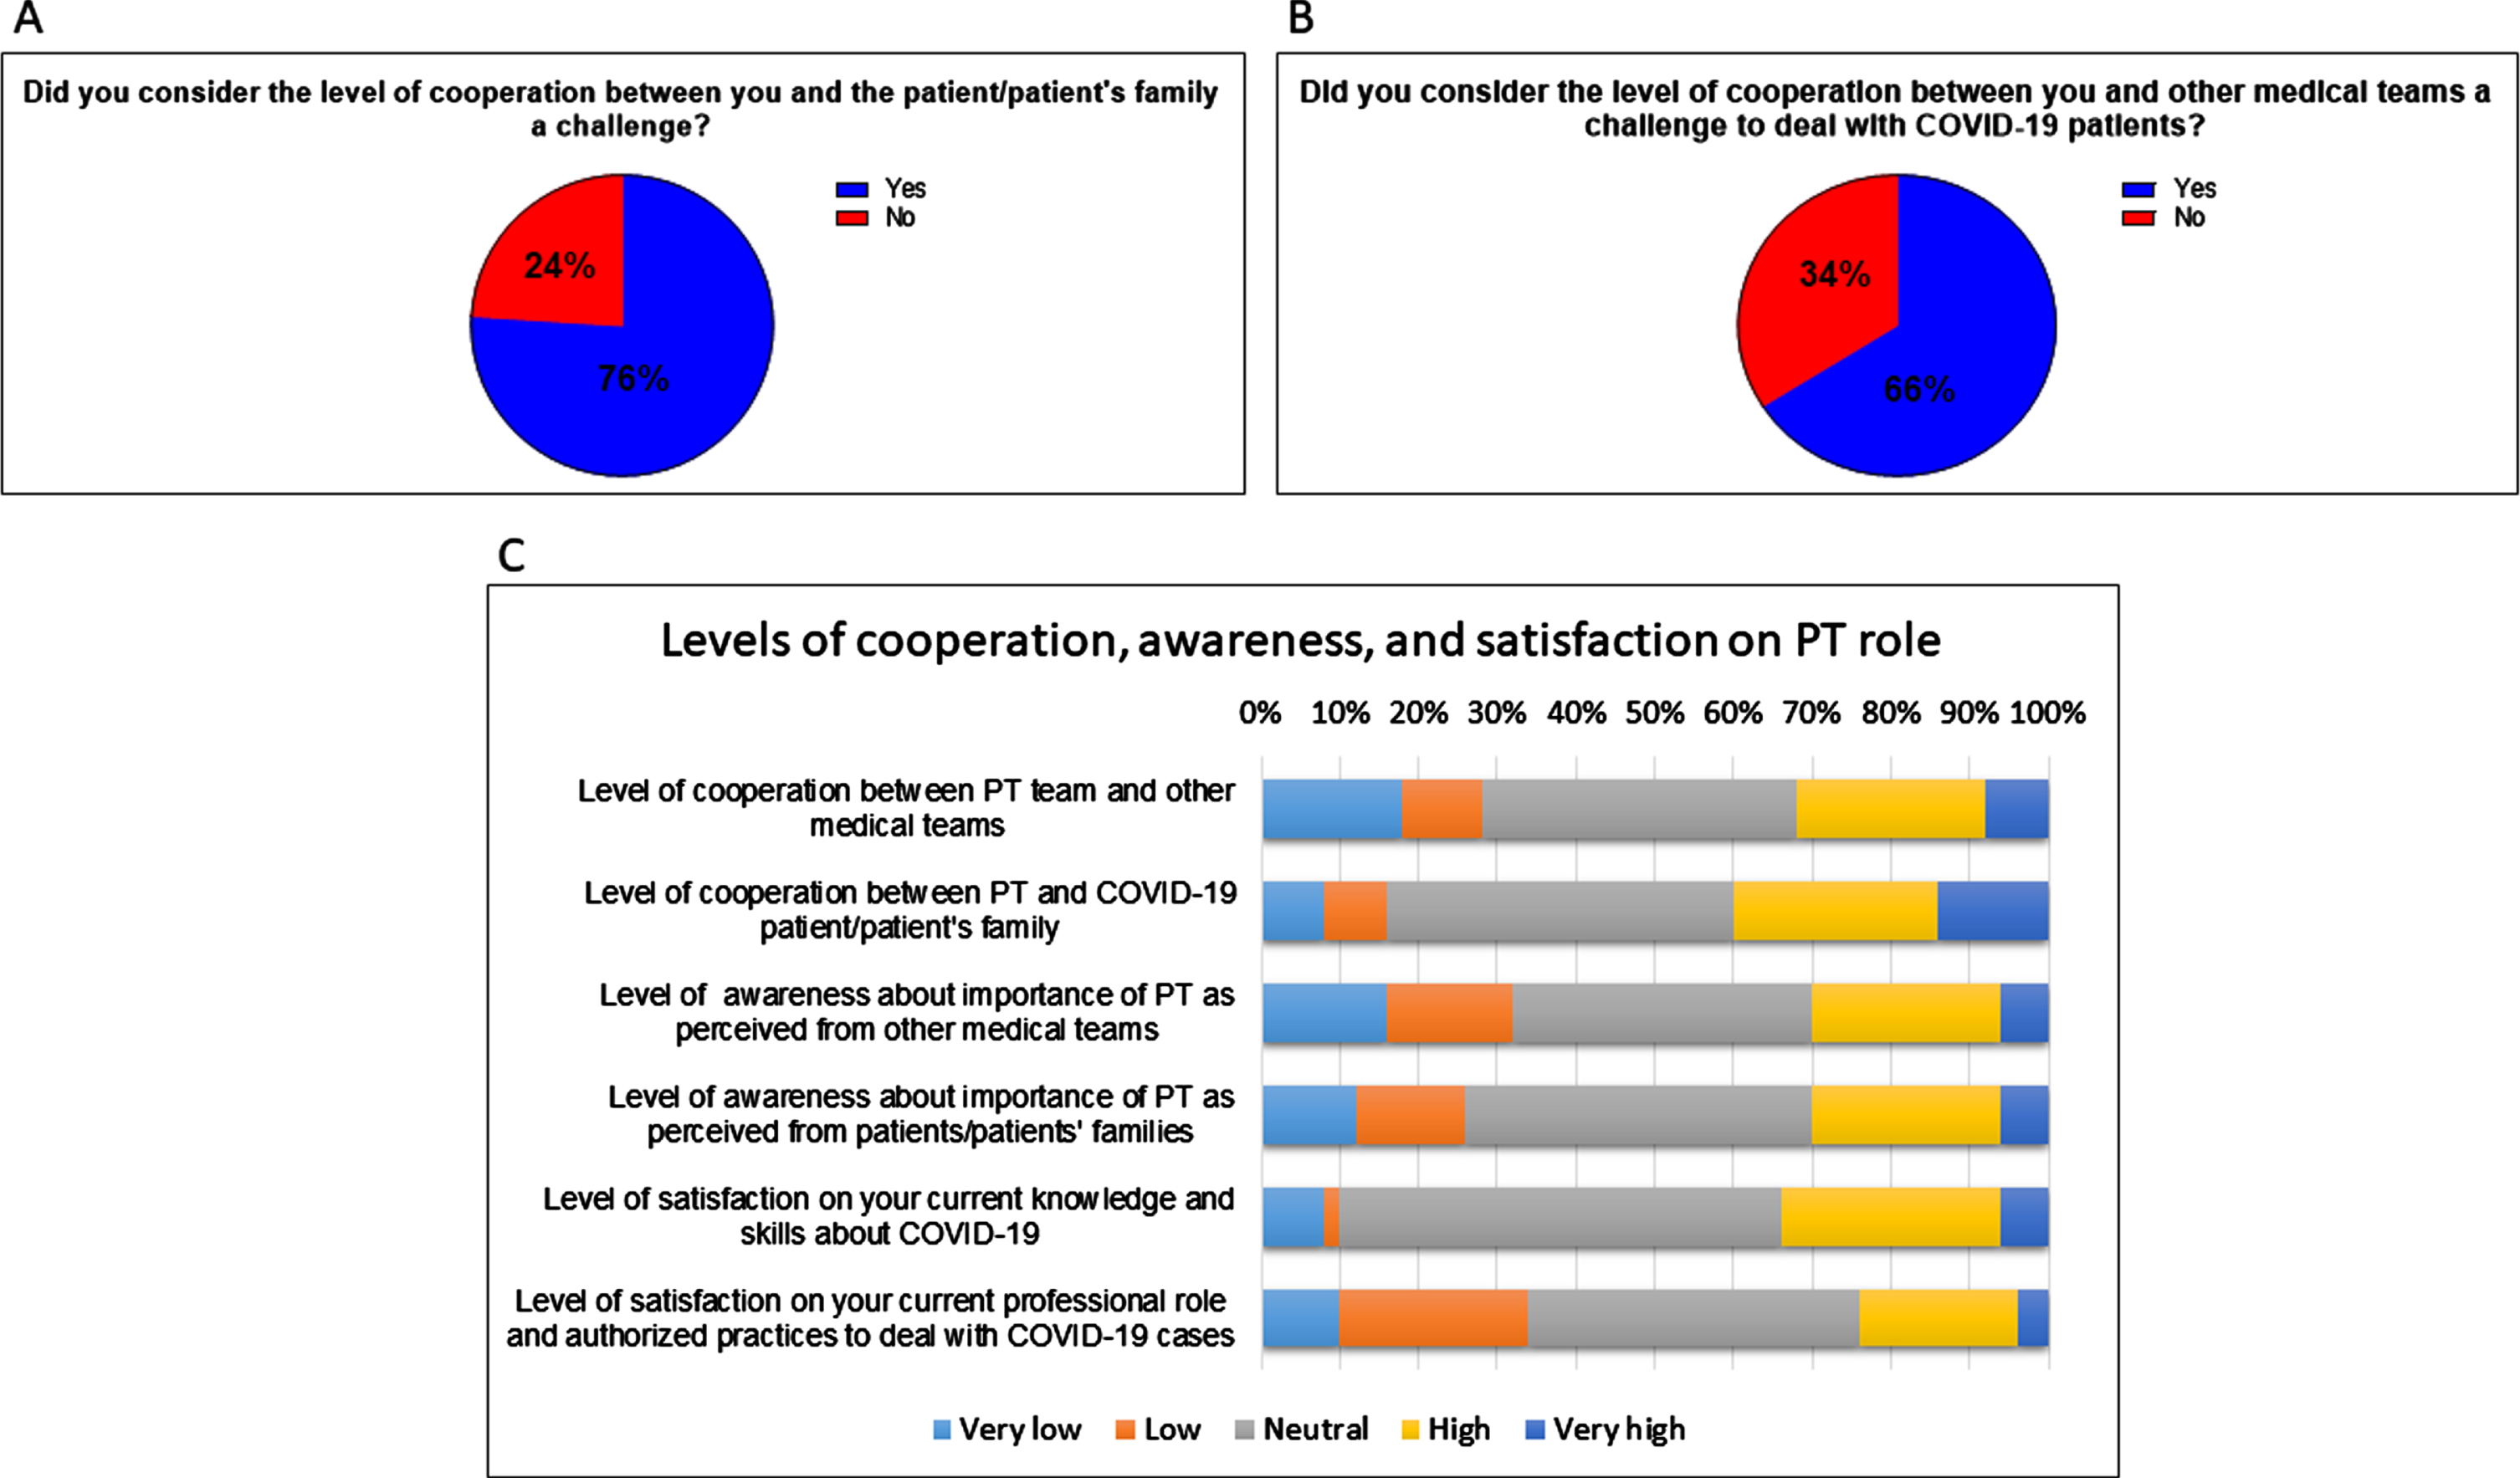 Participants’ perception regarding challenges faced at the cooperation level with patients and patients’ families (A), and with other medical teams (B). Levels of cooperation and awareness on PT role as perceived by patients and other medical teams, and levels of satisfaction on knowledge, skills, and professional authorization during the management of COVID-19 patients (C).